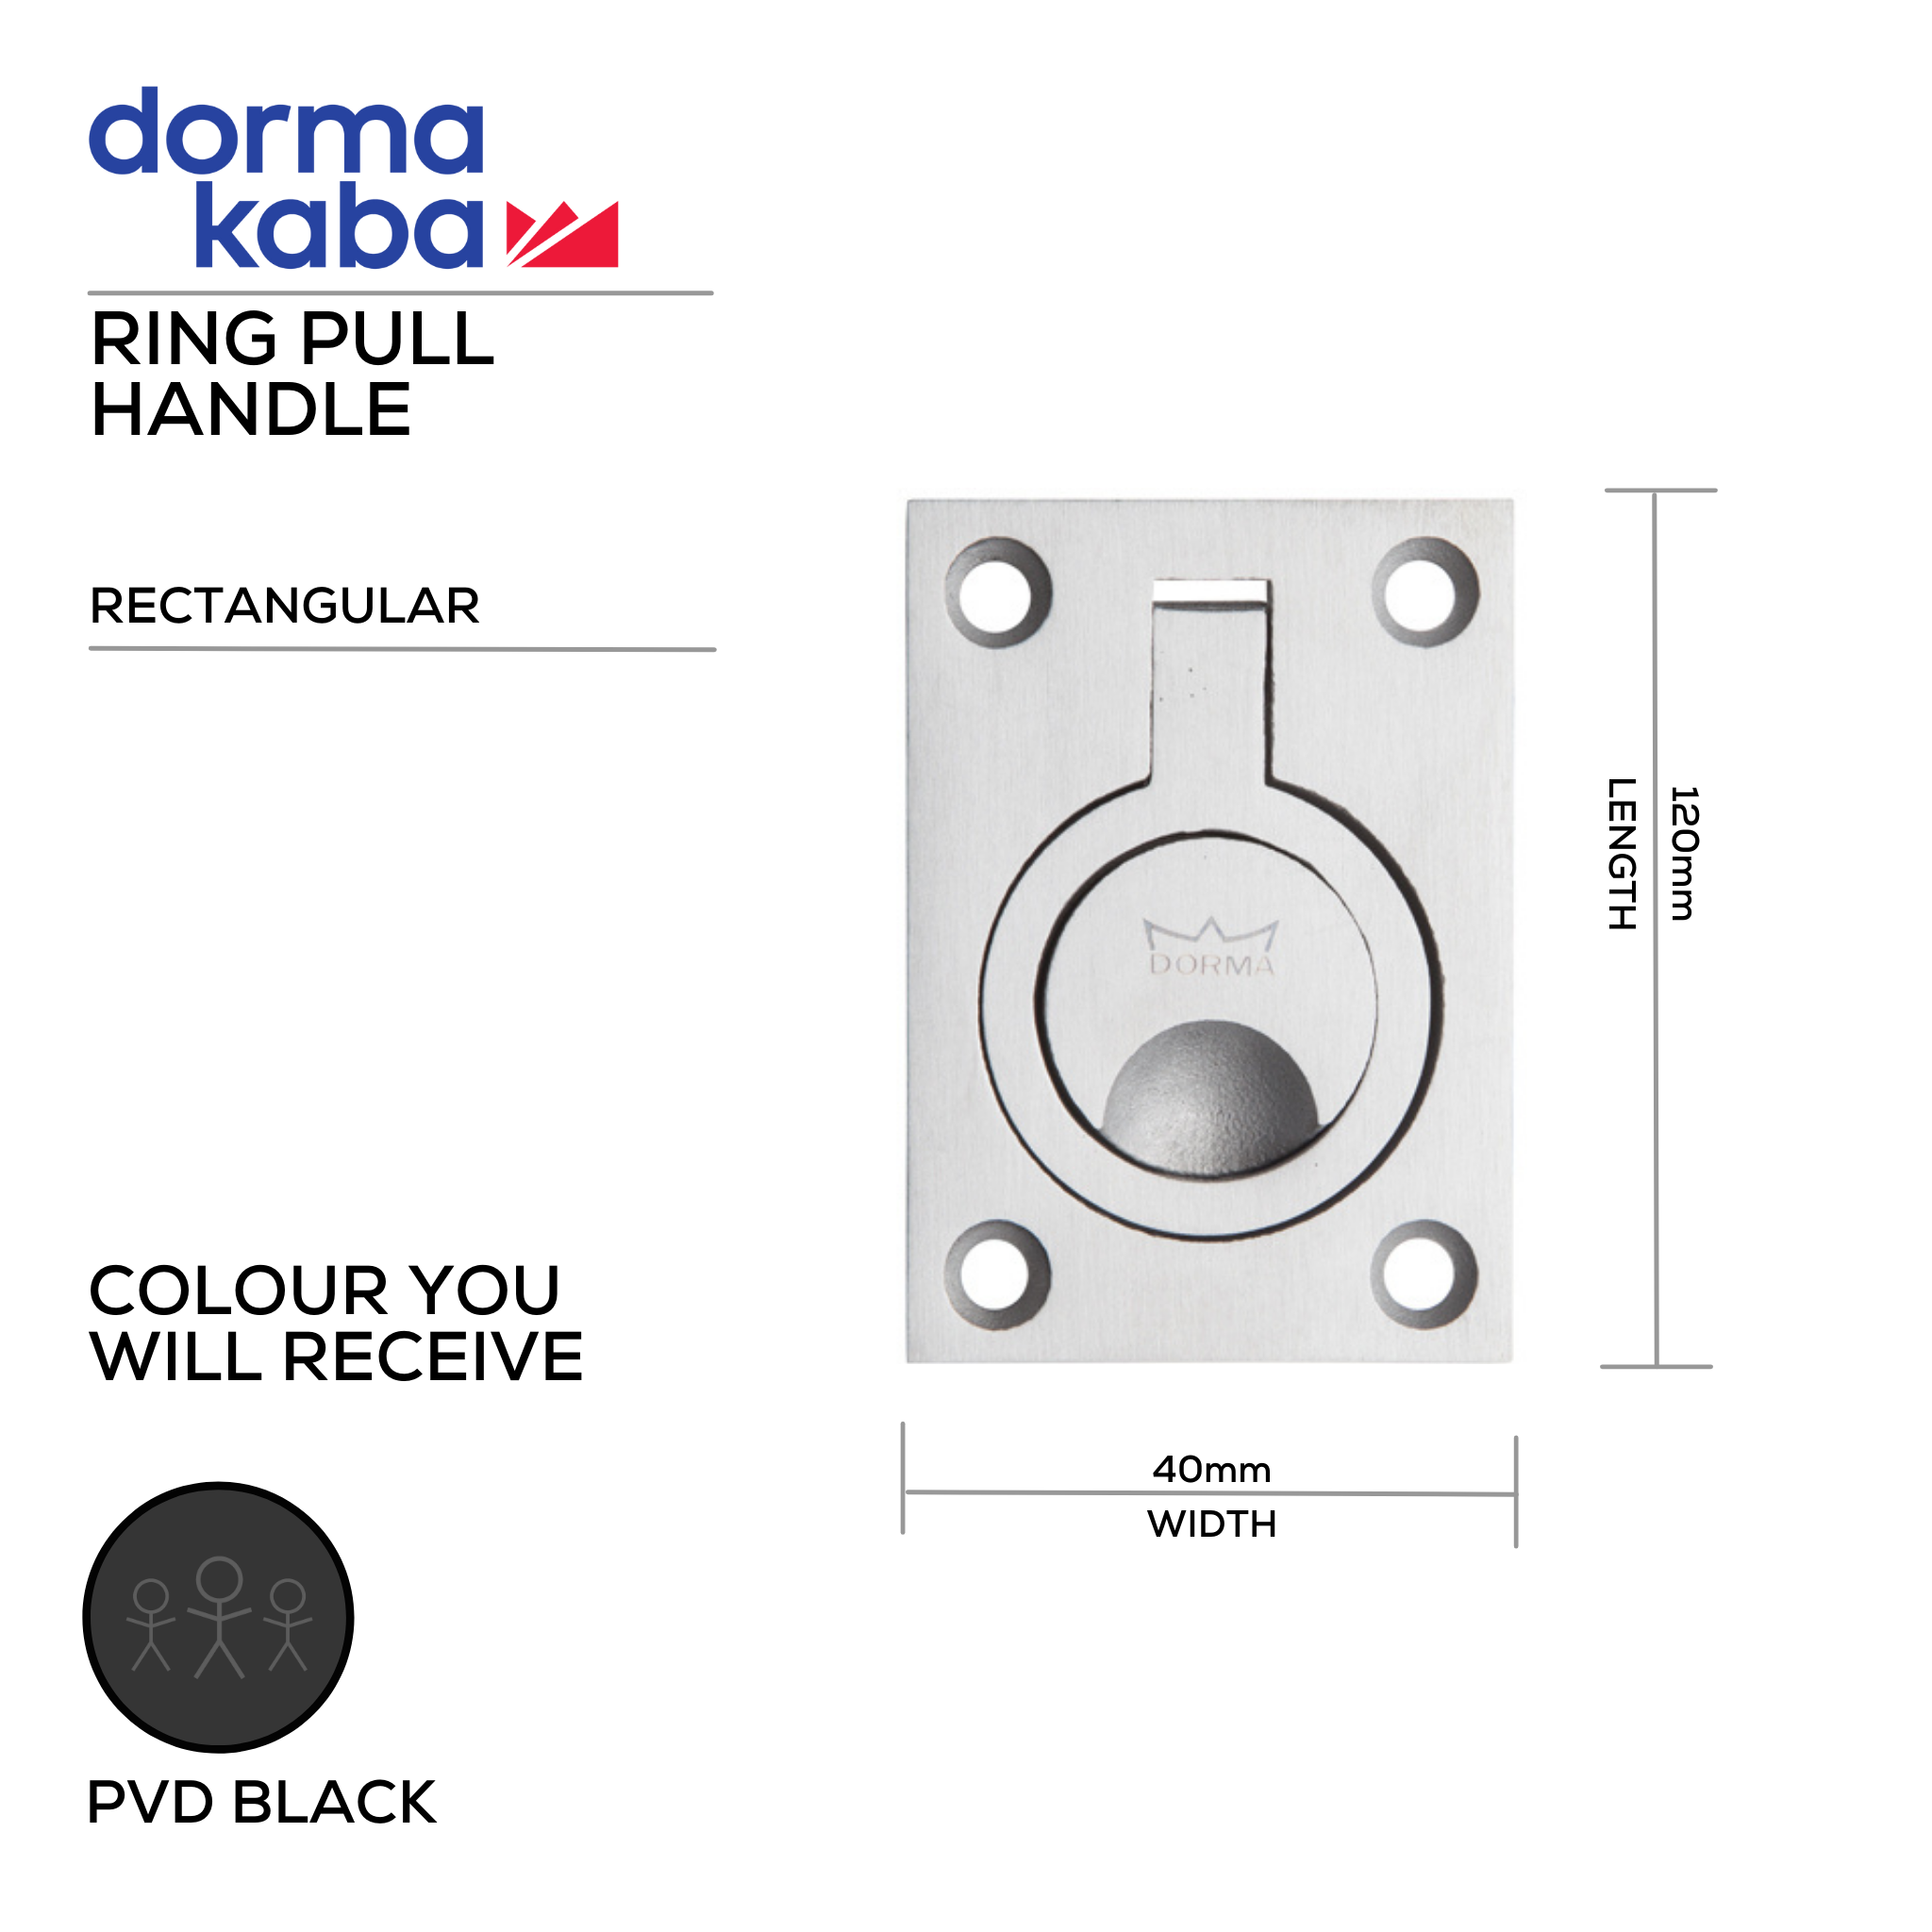 DRP-PVD-023 PVD Black, Pull Handle, Recessed, Flush, Ring, 44mm (l) x 64mm (w), PVD Black, DORMAKABA